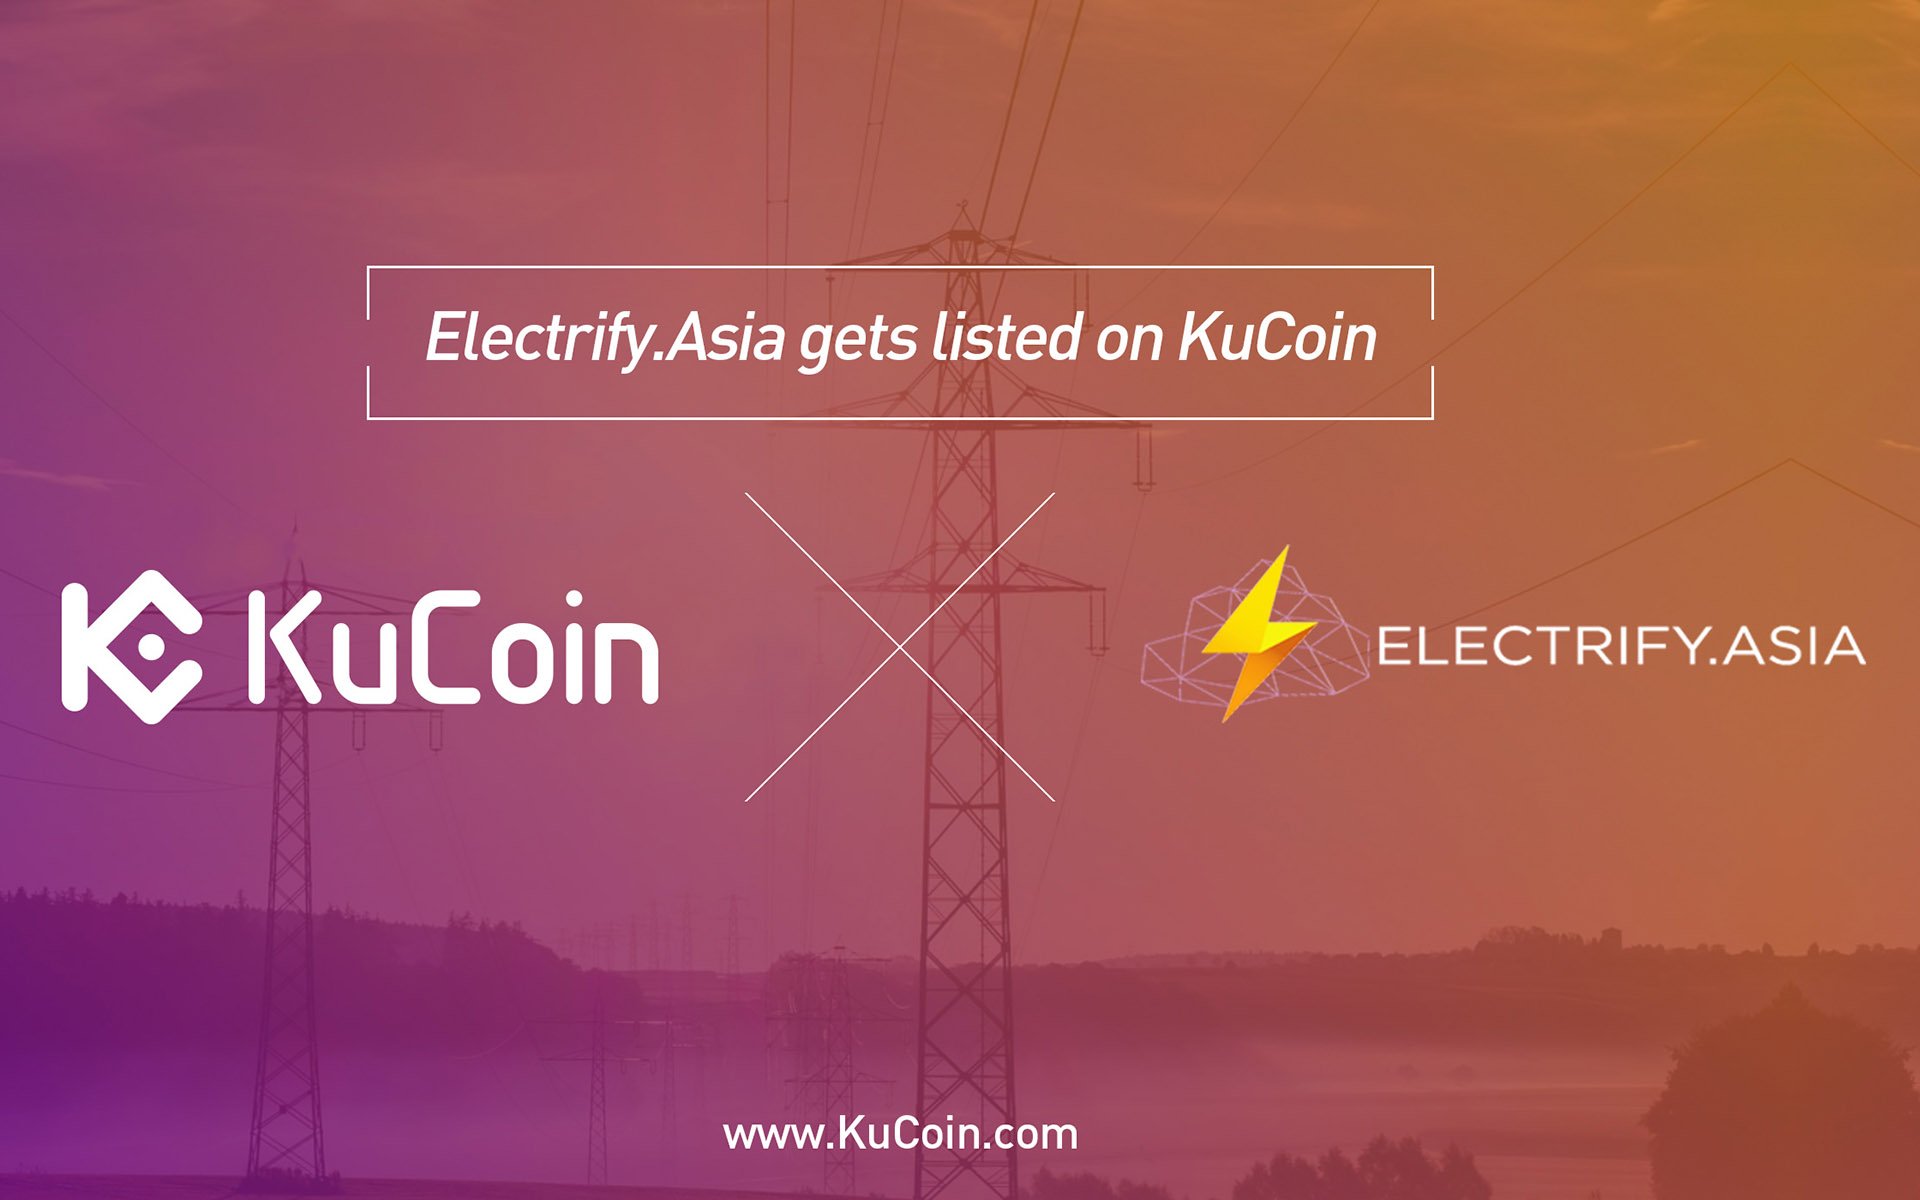 Electrify.Asia (ELEC) Gets Listed on KuCoin!